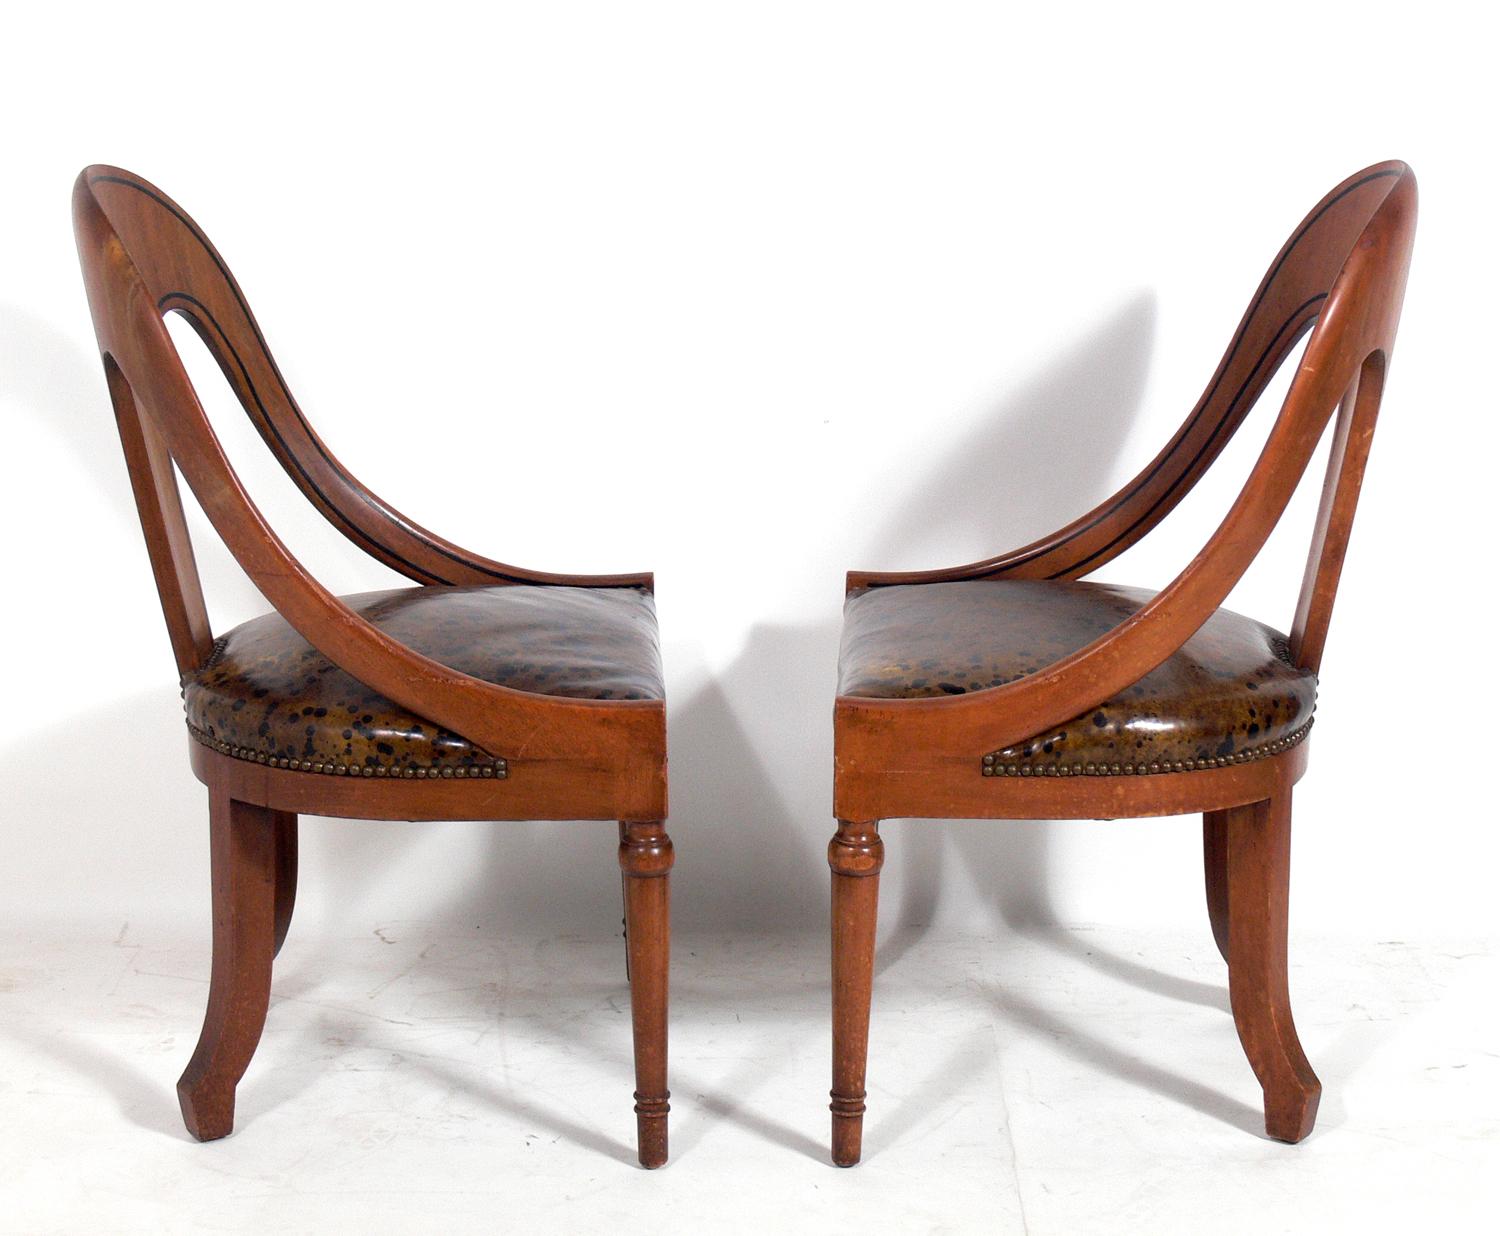 Hollywood Regency Pair of Spoonback Chairs with Oil Spot Leather Seats For Sale